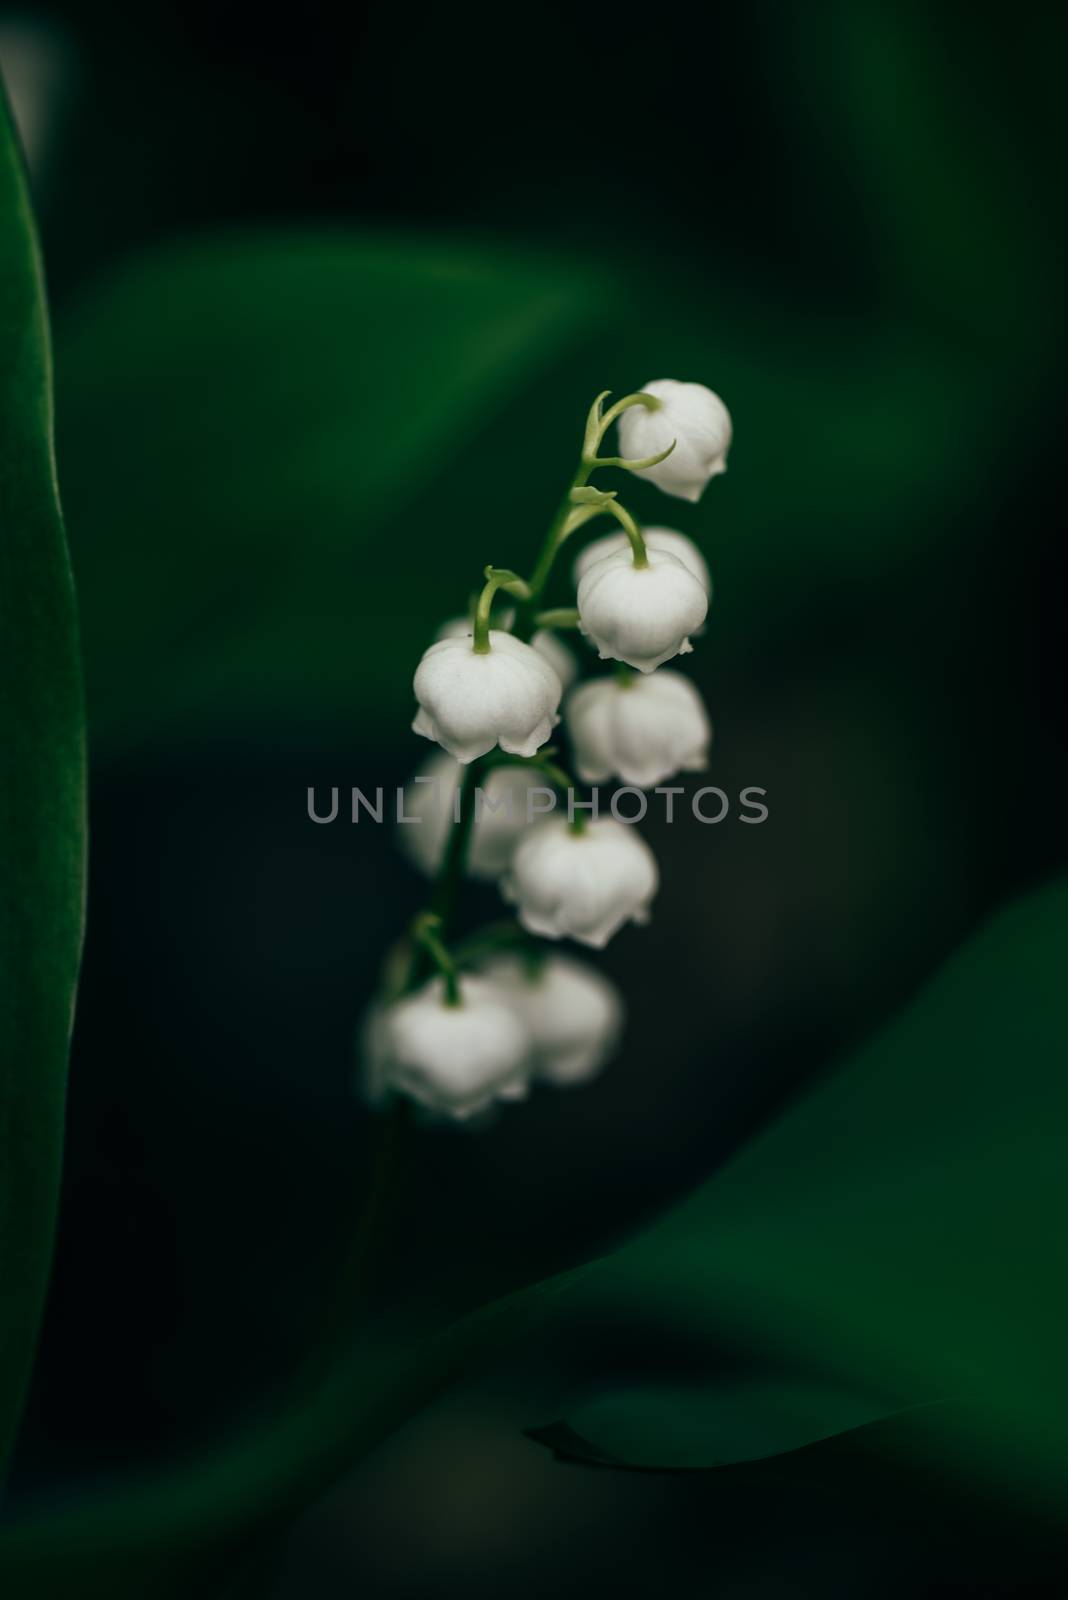 Flower of lily of the valley in forest on a blurred background. Selective focus